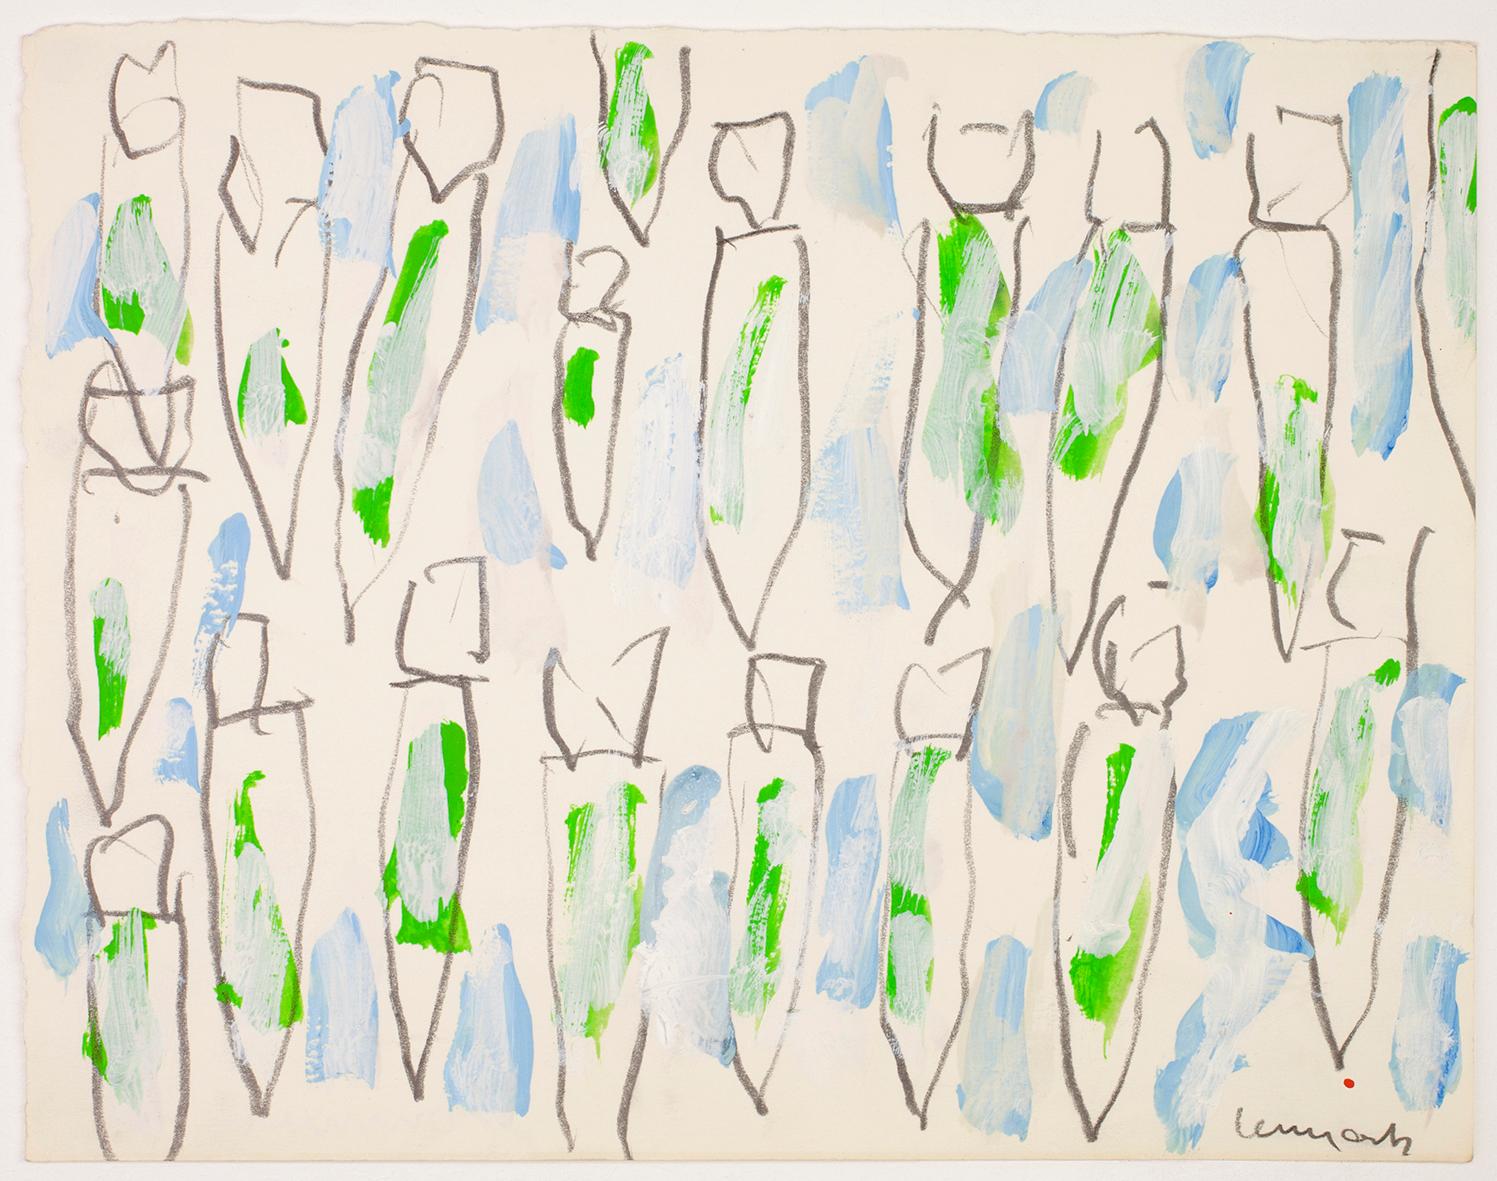 Johan Lennarts
Untitled, 1980
gouache and pencil on paper
25 x 32 cm